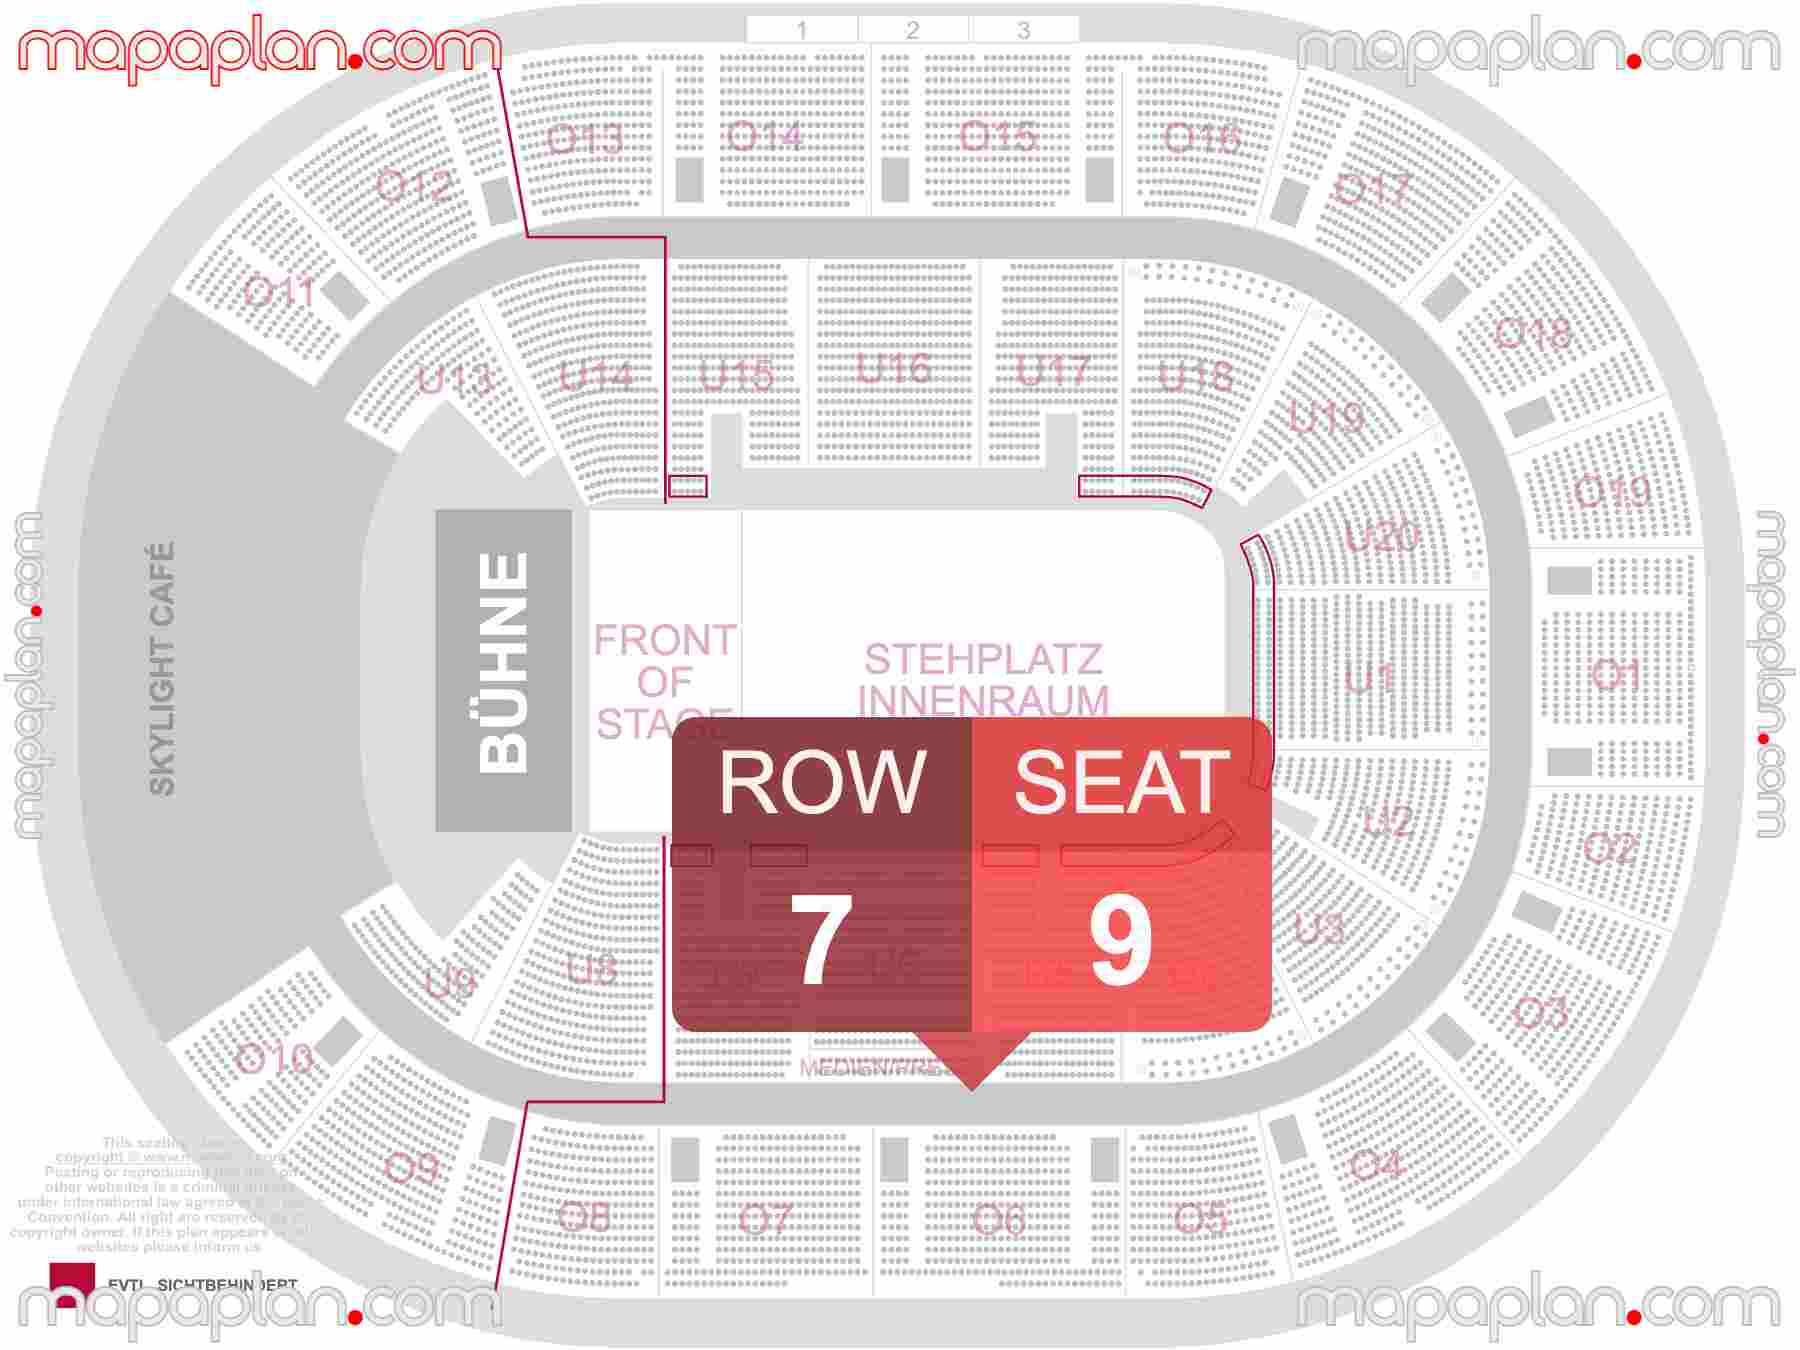 Hamburg Barclays Arena seating plan Concert with PIT front of stage floor standing find best seats row numbering system map showing how many seats per row - Individual find my seat virtual locator